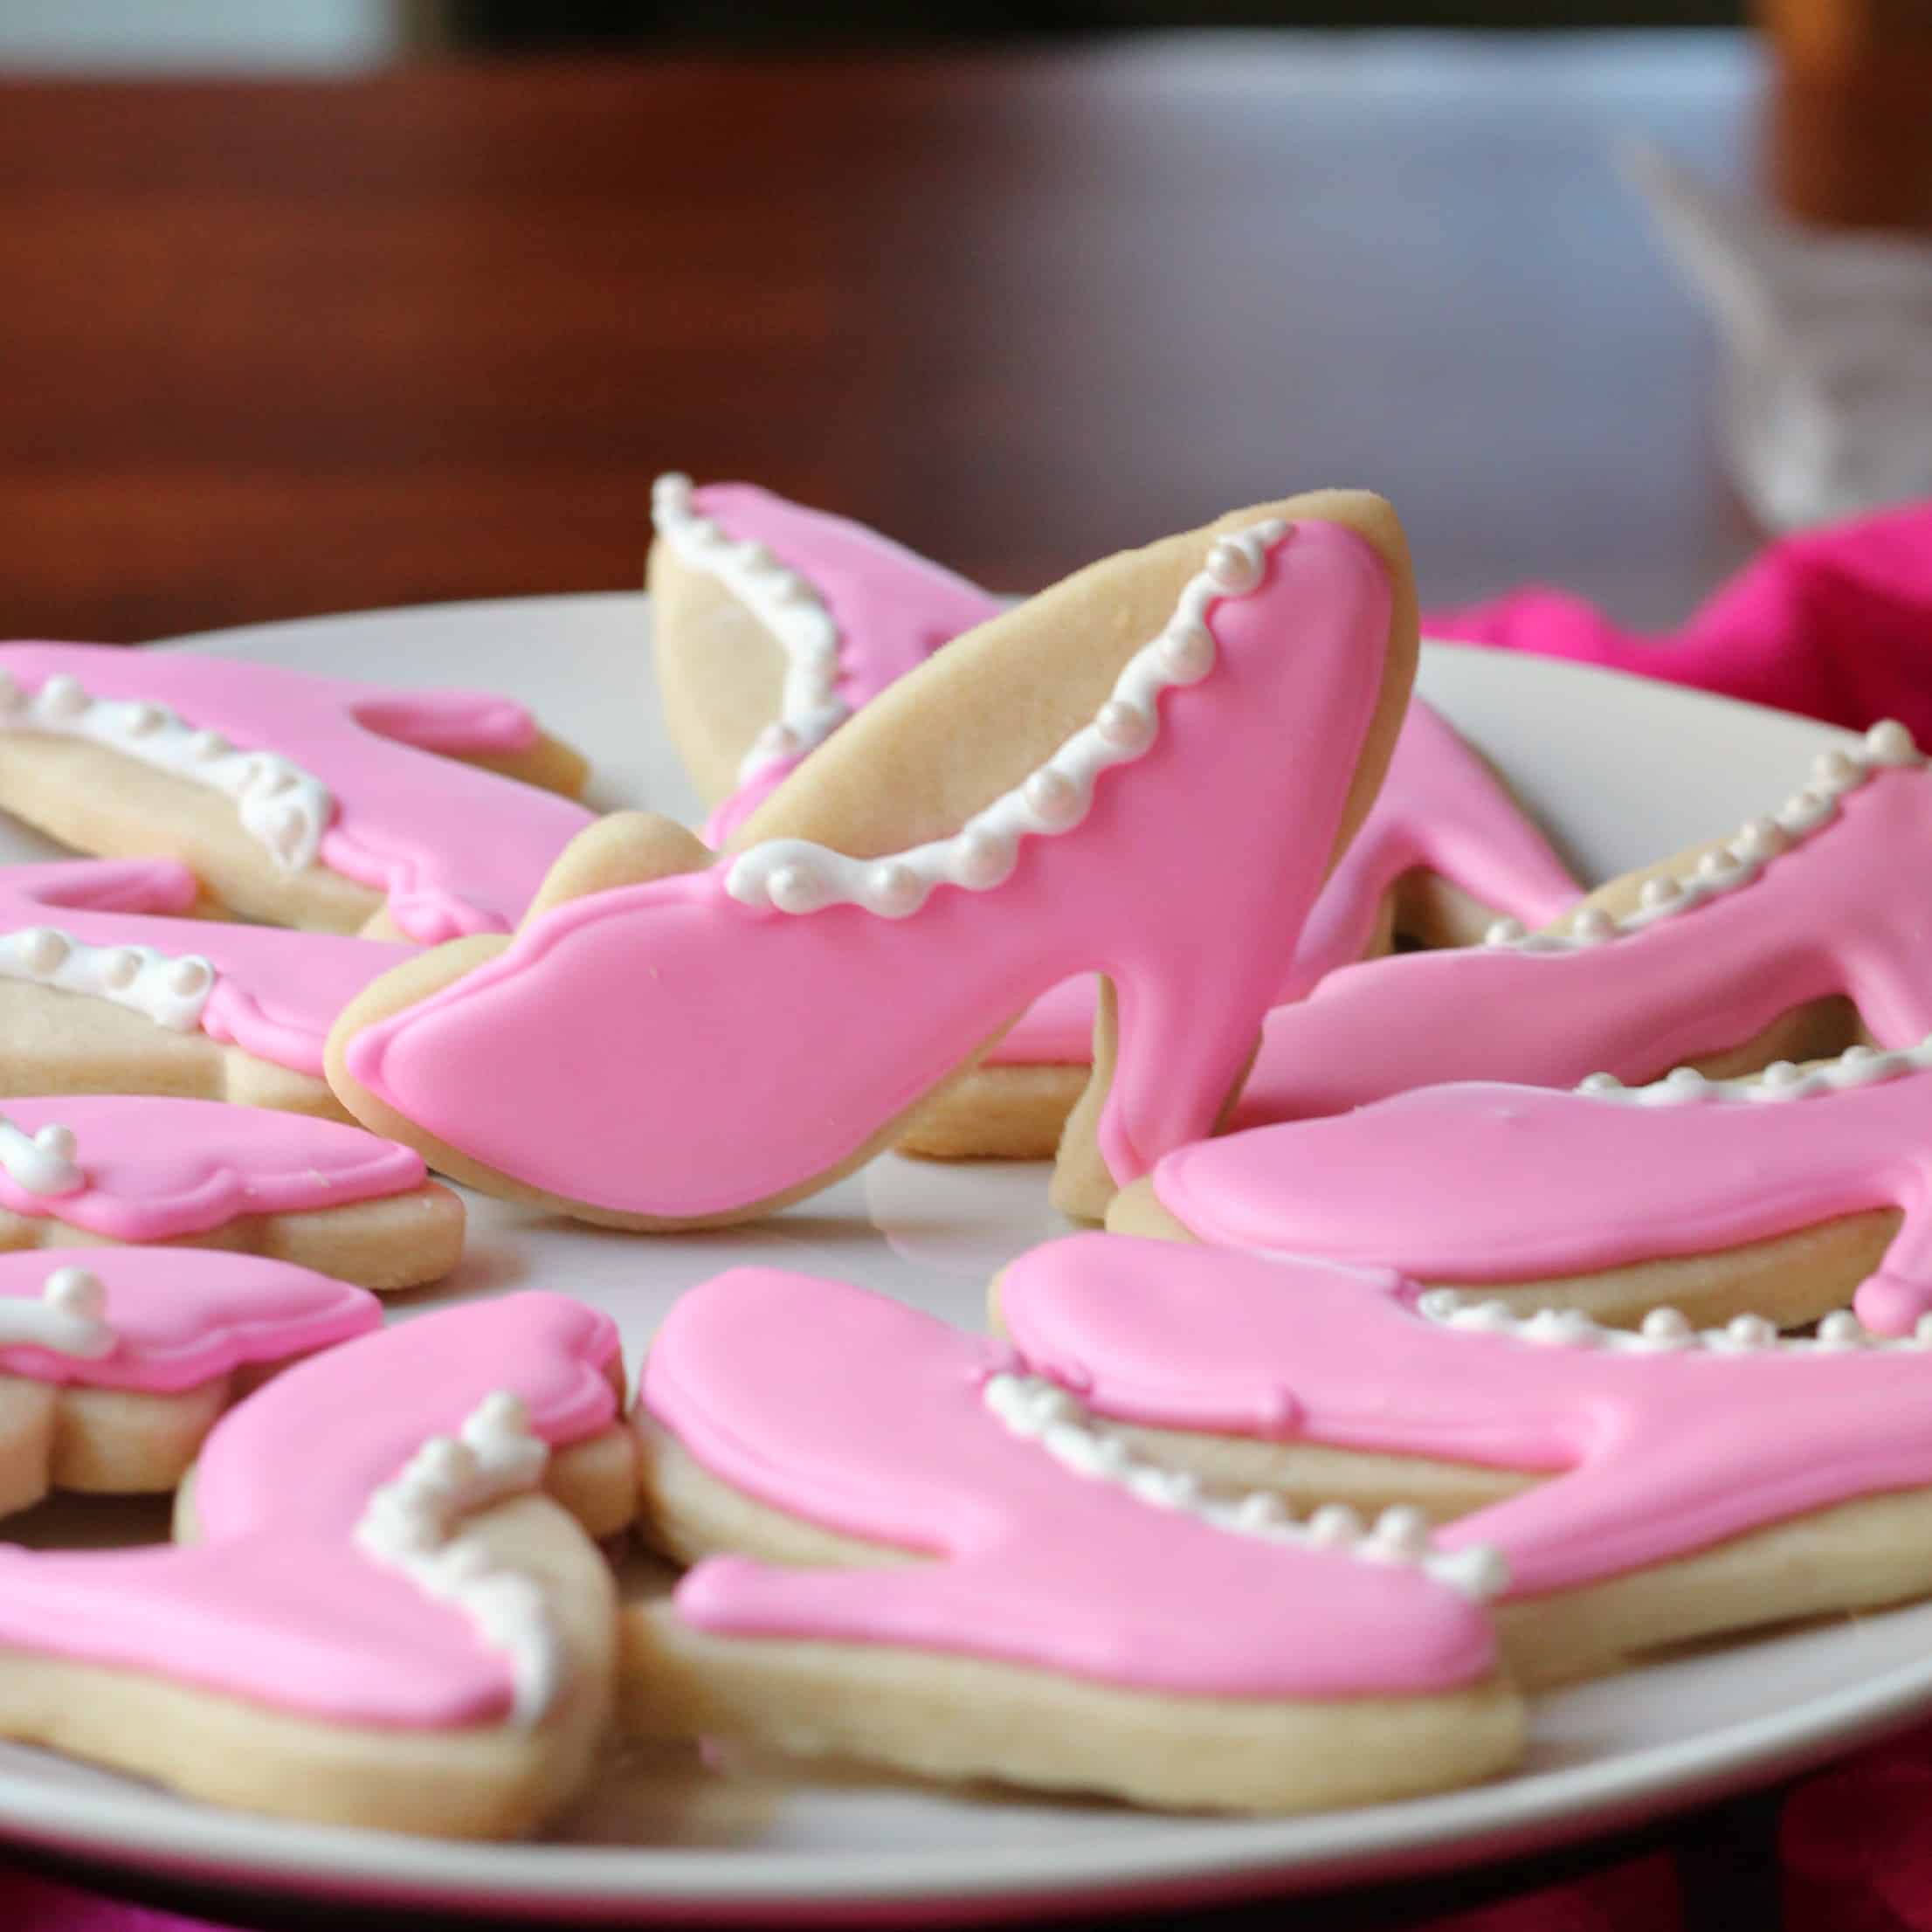 plate full of decorated sugar cookies with royal icing in the shape of high heeled shoes